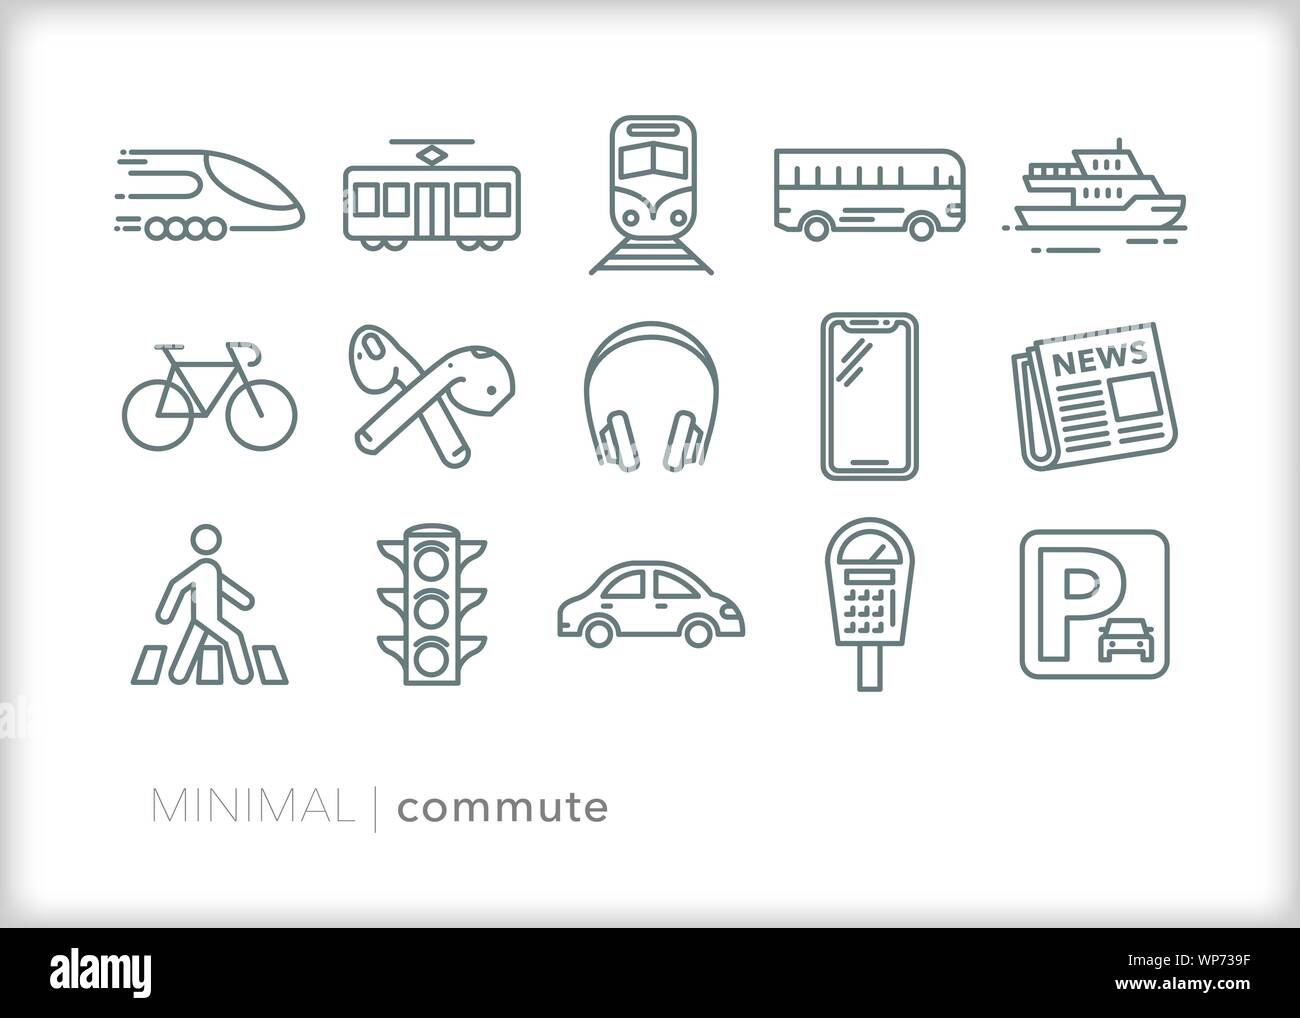 Set of 15 commute line icons for daily transportation to work Stock Vector